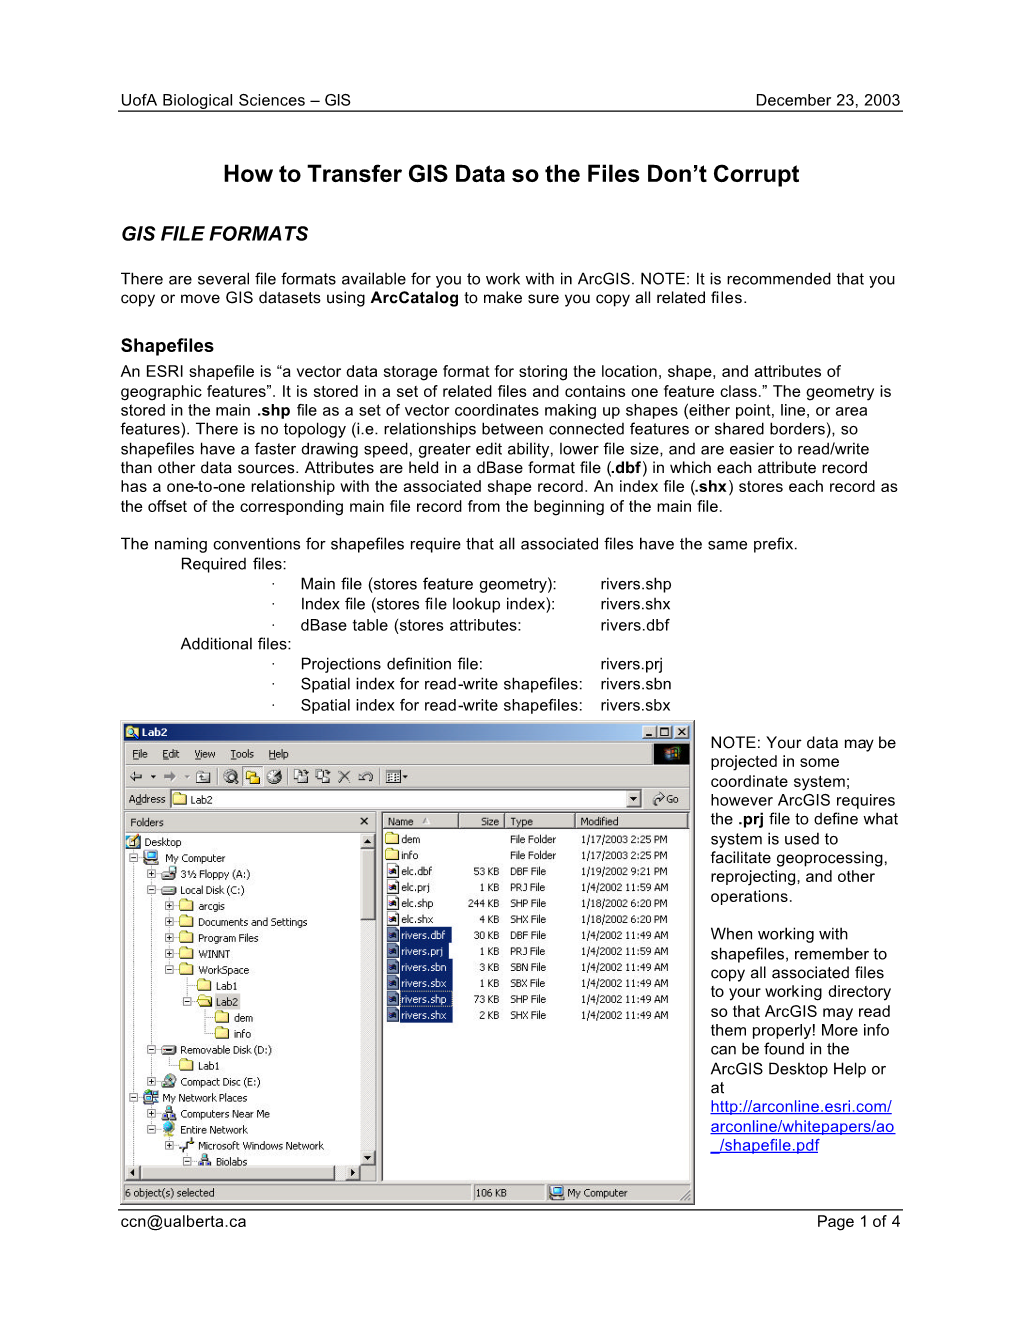 How to Transfer GIS Data So the Files Don't Corrupt